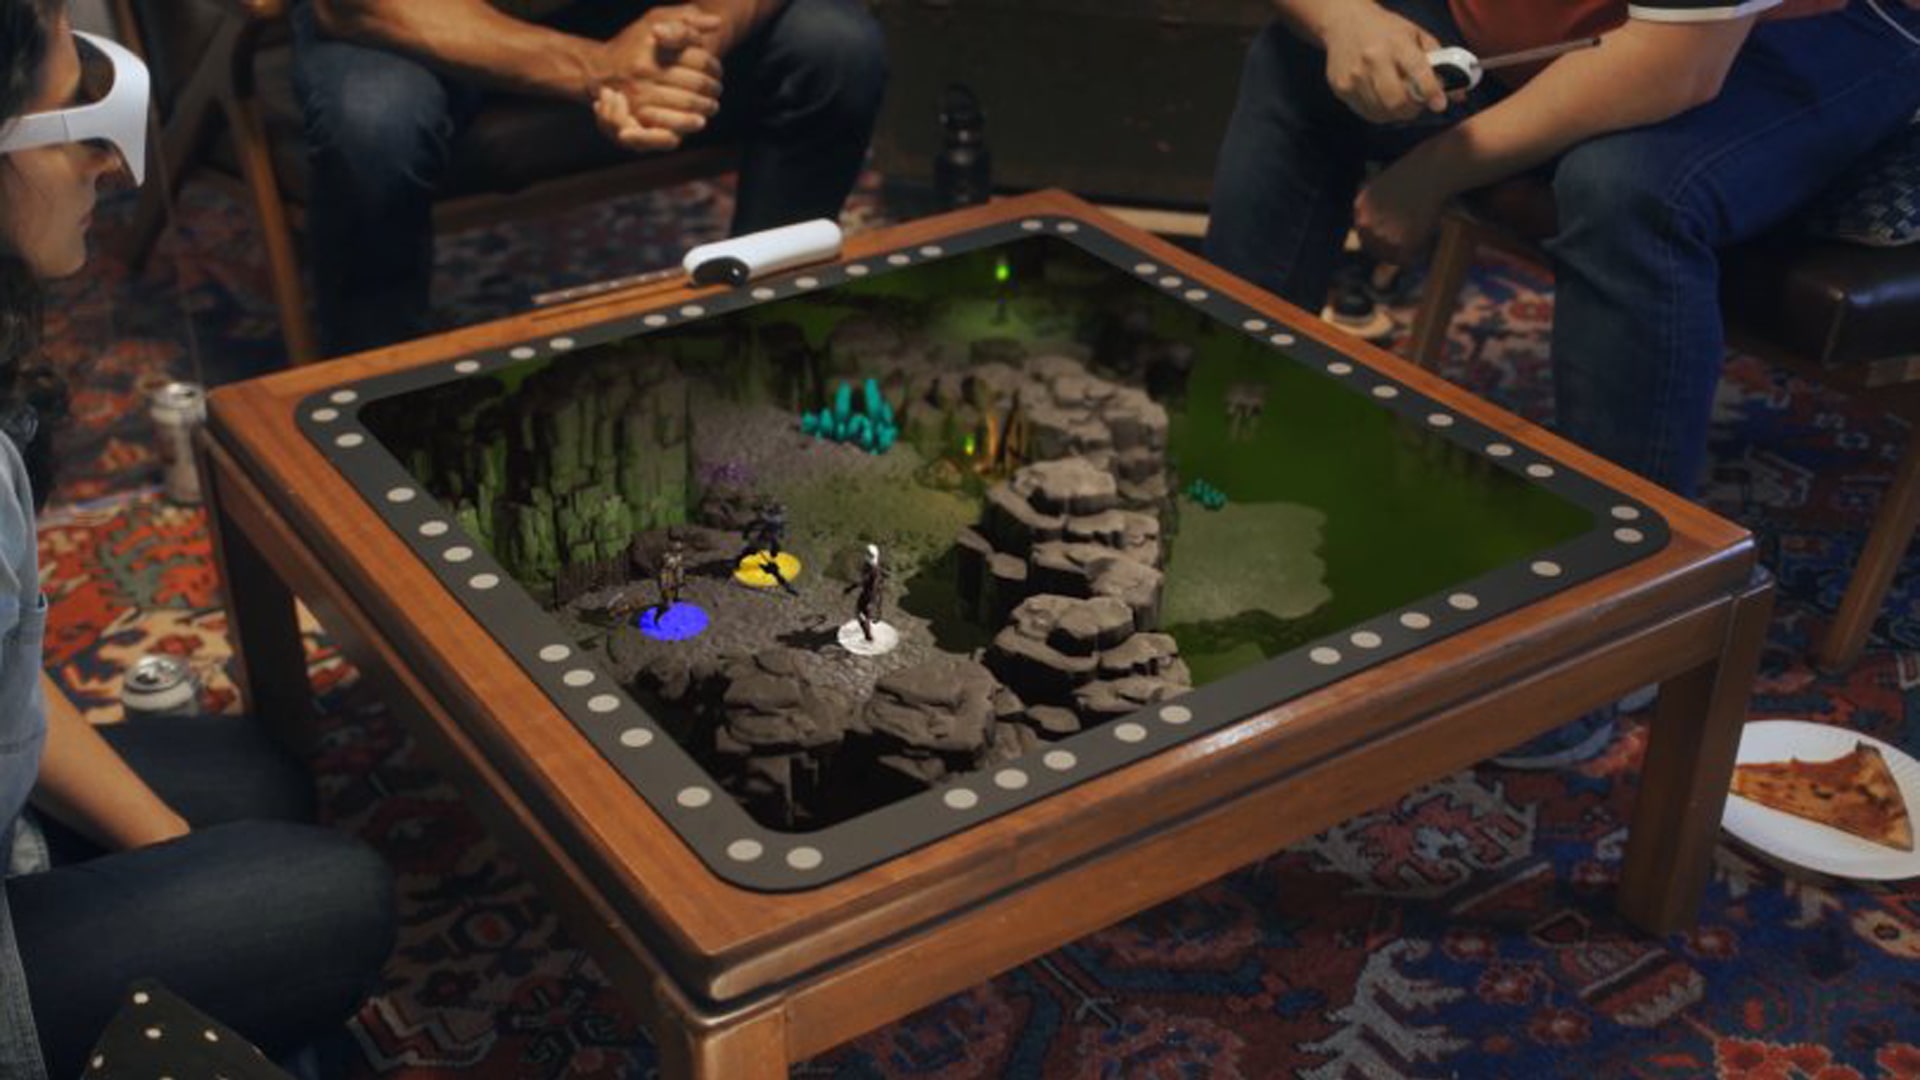 A futuristic display of holographic tabletop gaming, illustrating advanced technology merging with traditional board game elements.